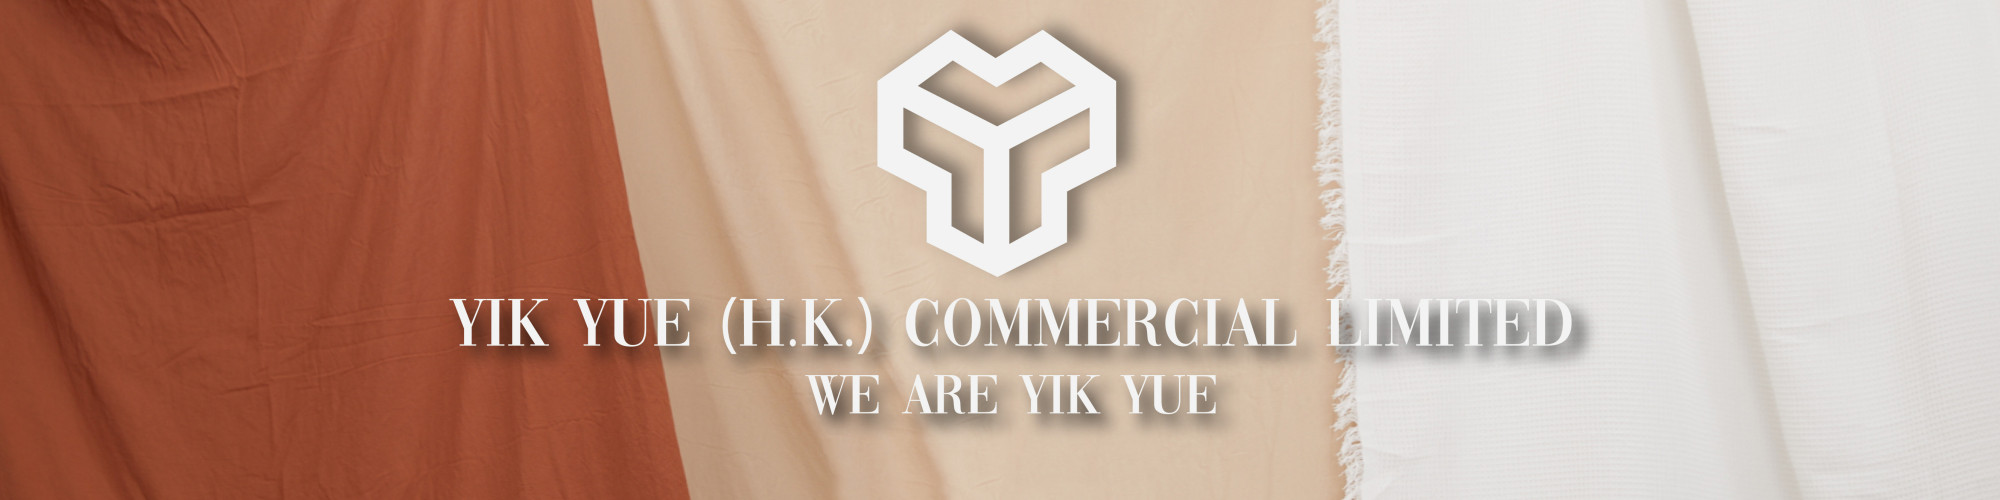 YIK YUE (H.K.) COMMERCIAL LIMITED